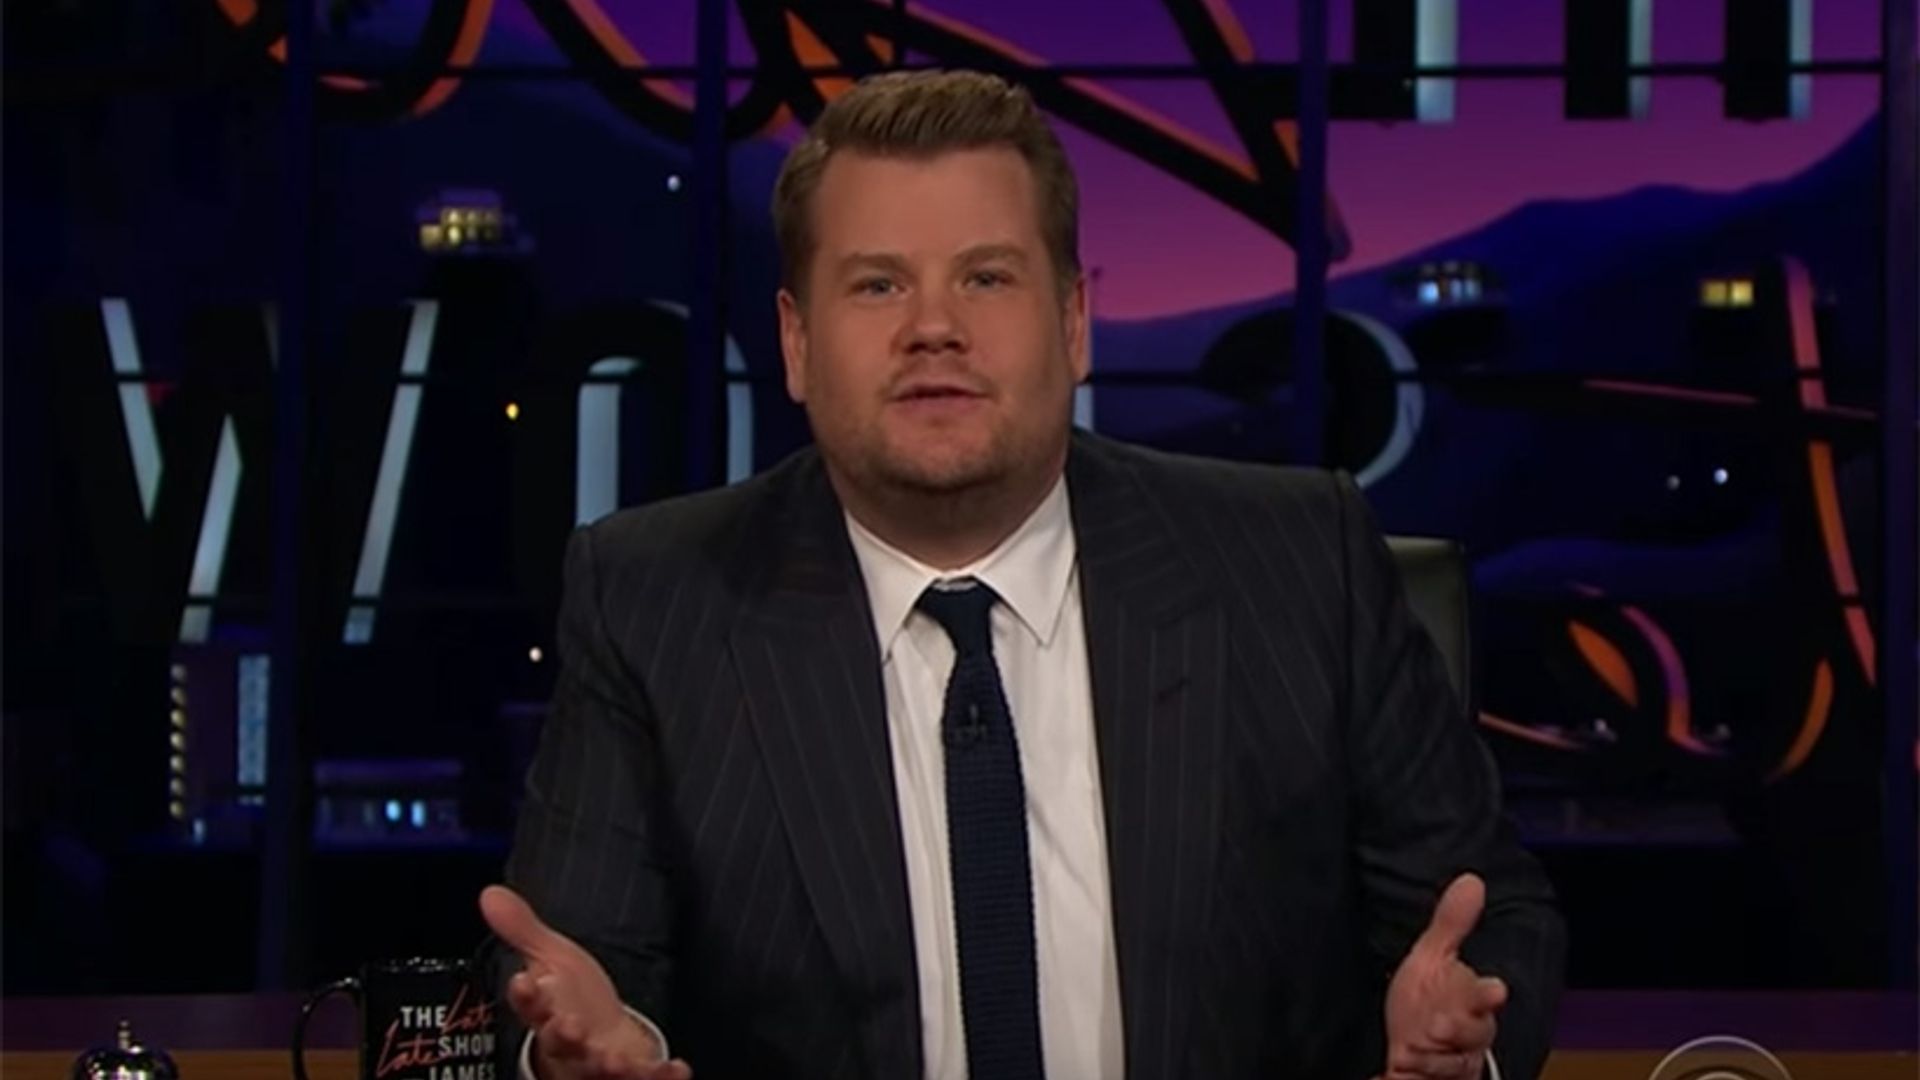 James Corden pays tribute to victims of Texas shooting